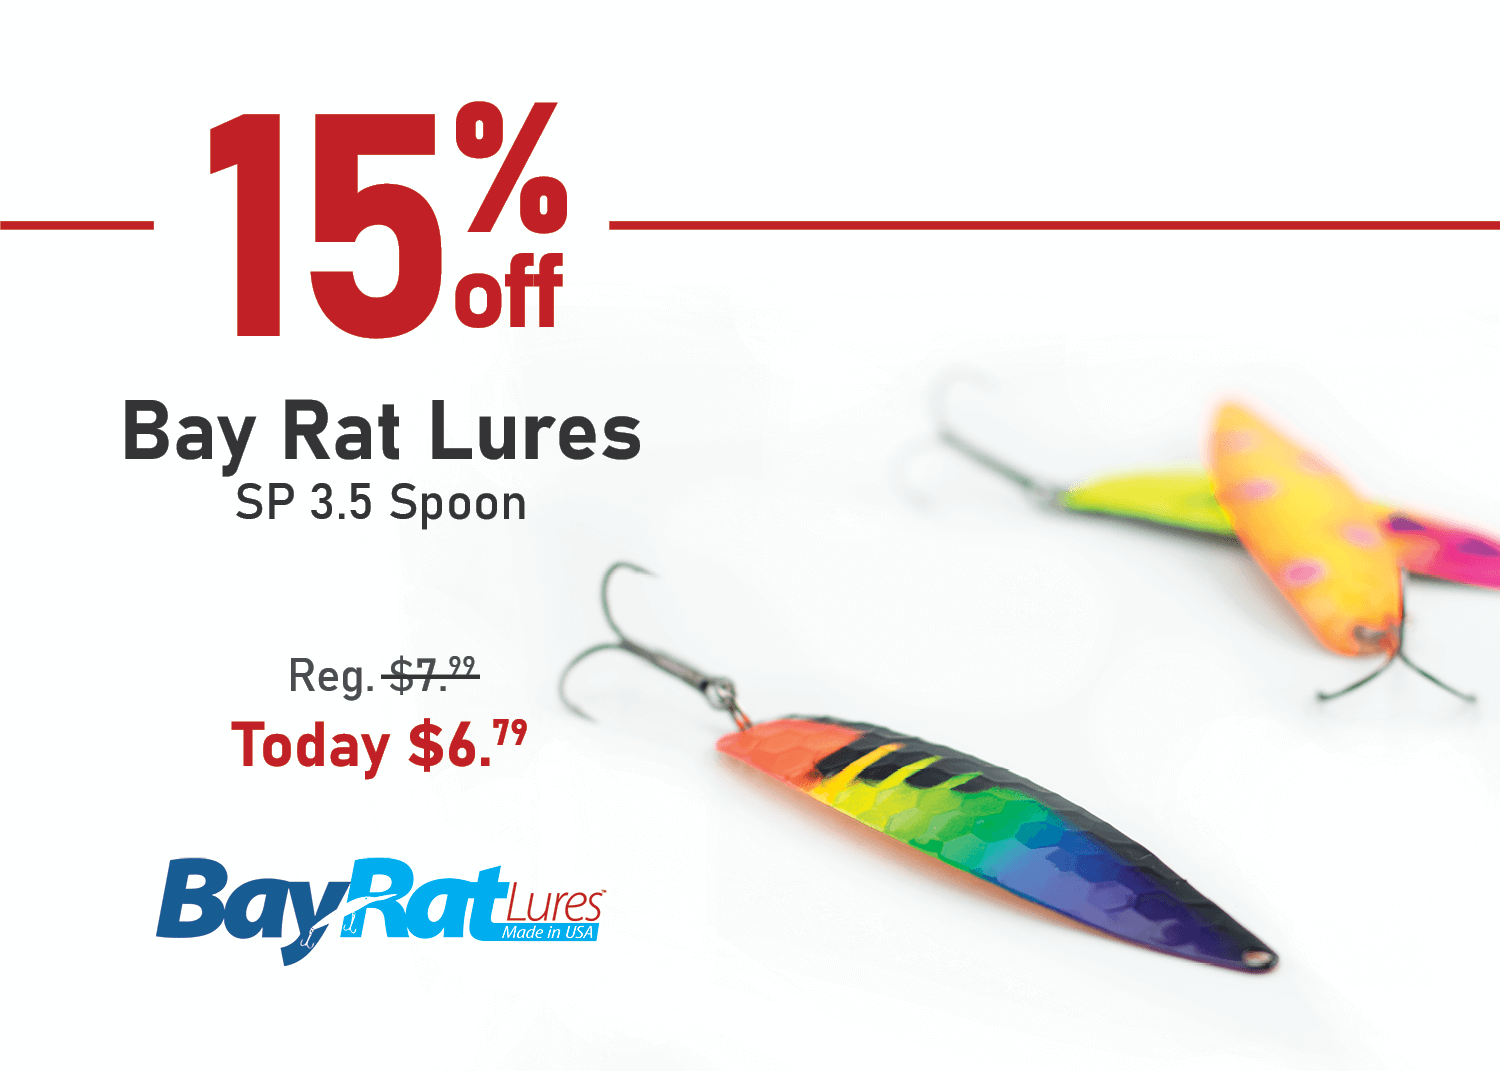 Take 15% off the Bay Rat Lures SP 3.5 Spoon